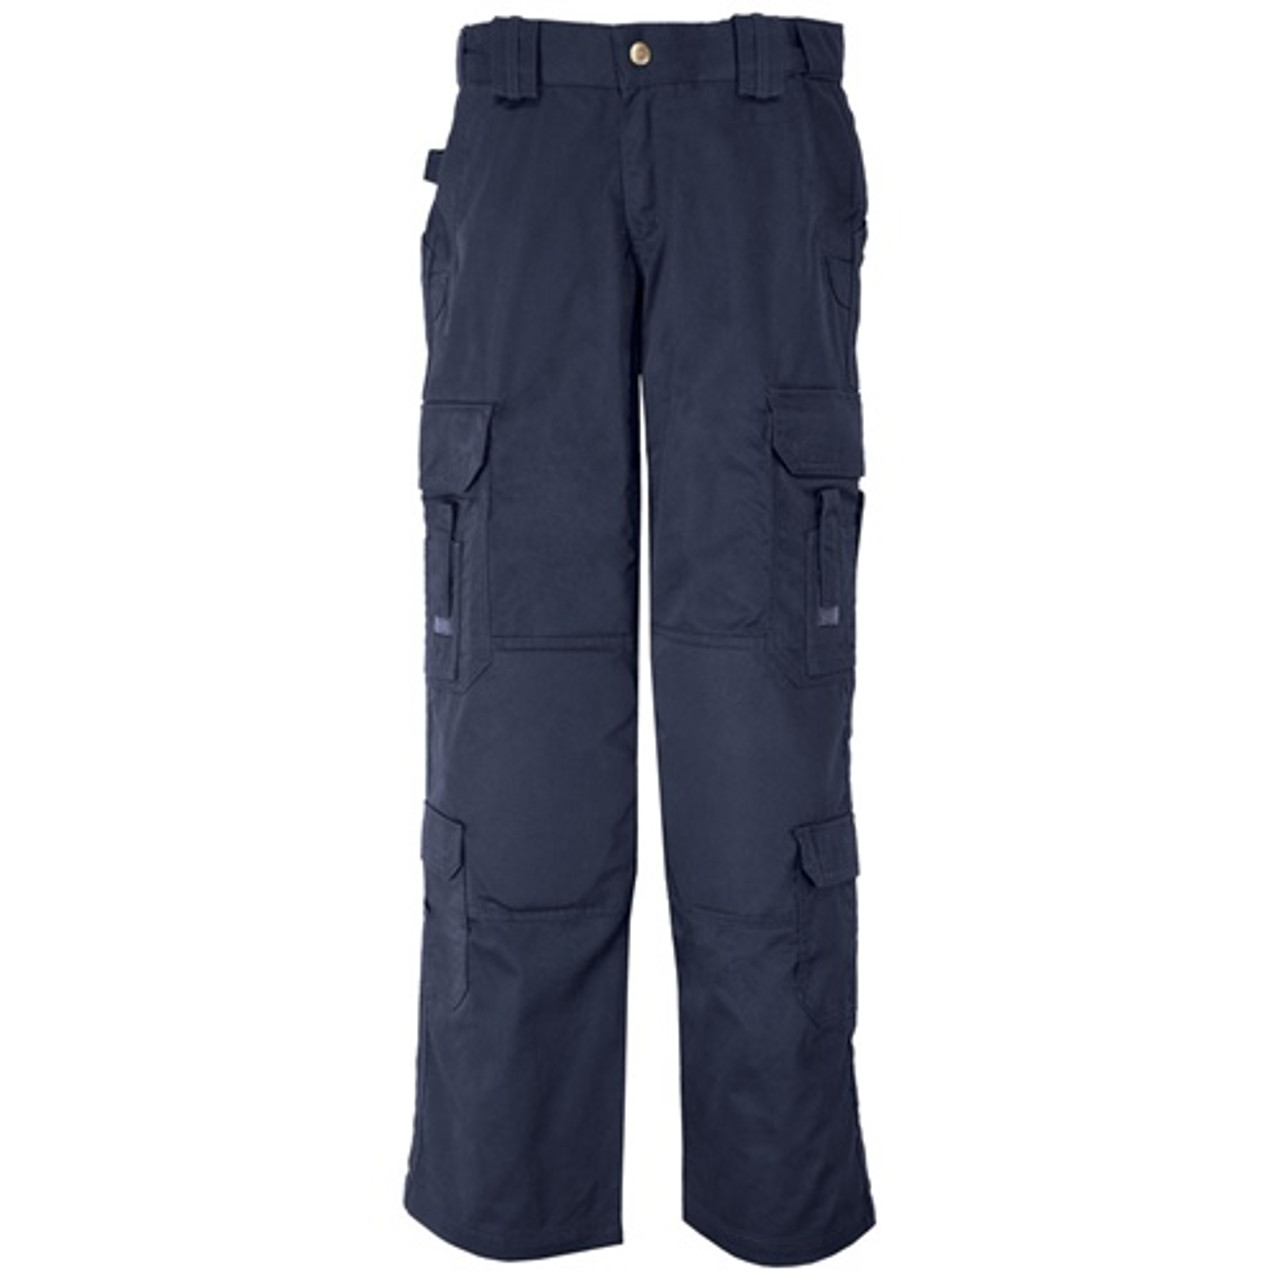 Buy Mens EMS Trousers - Liberty Uniforms Online at Best price - FL